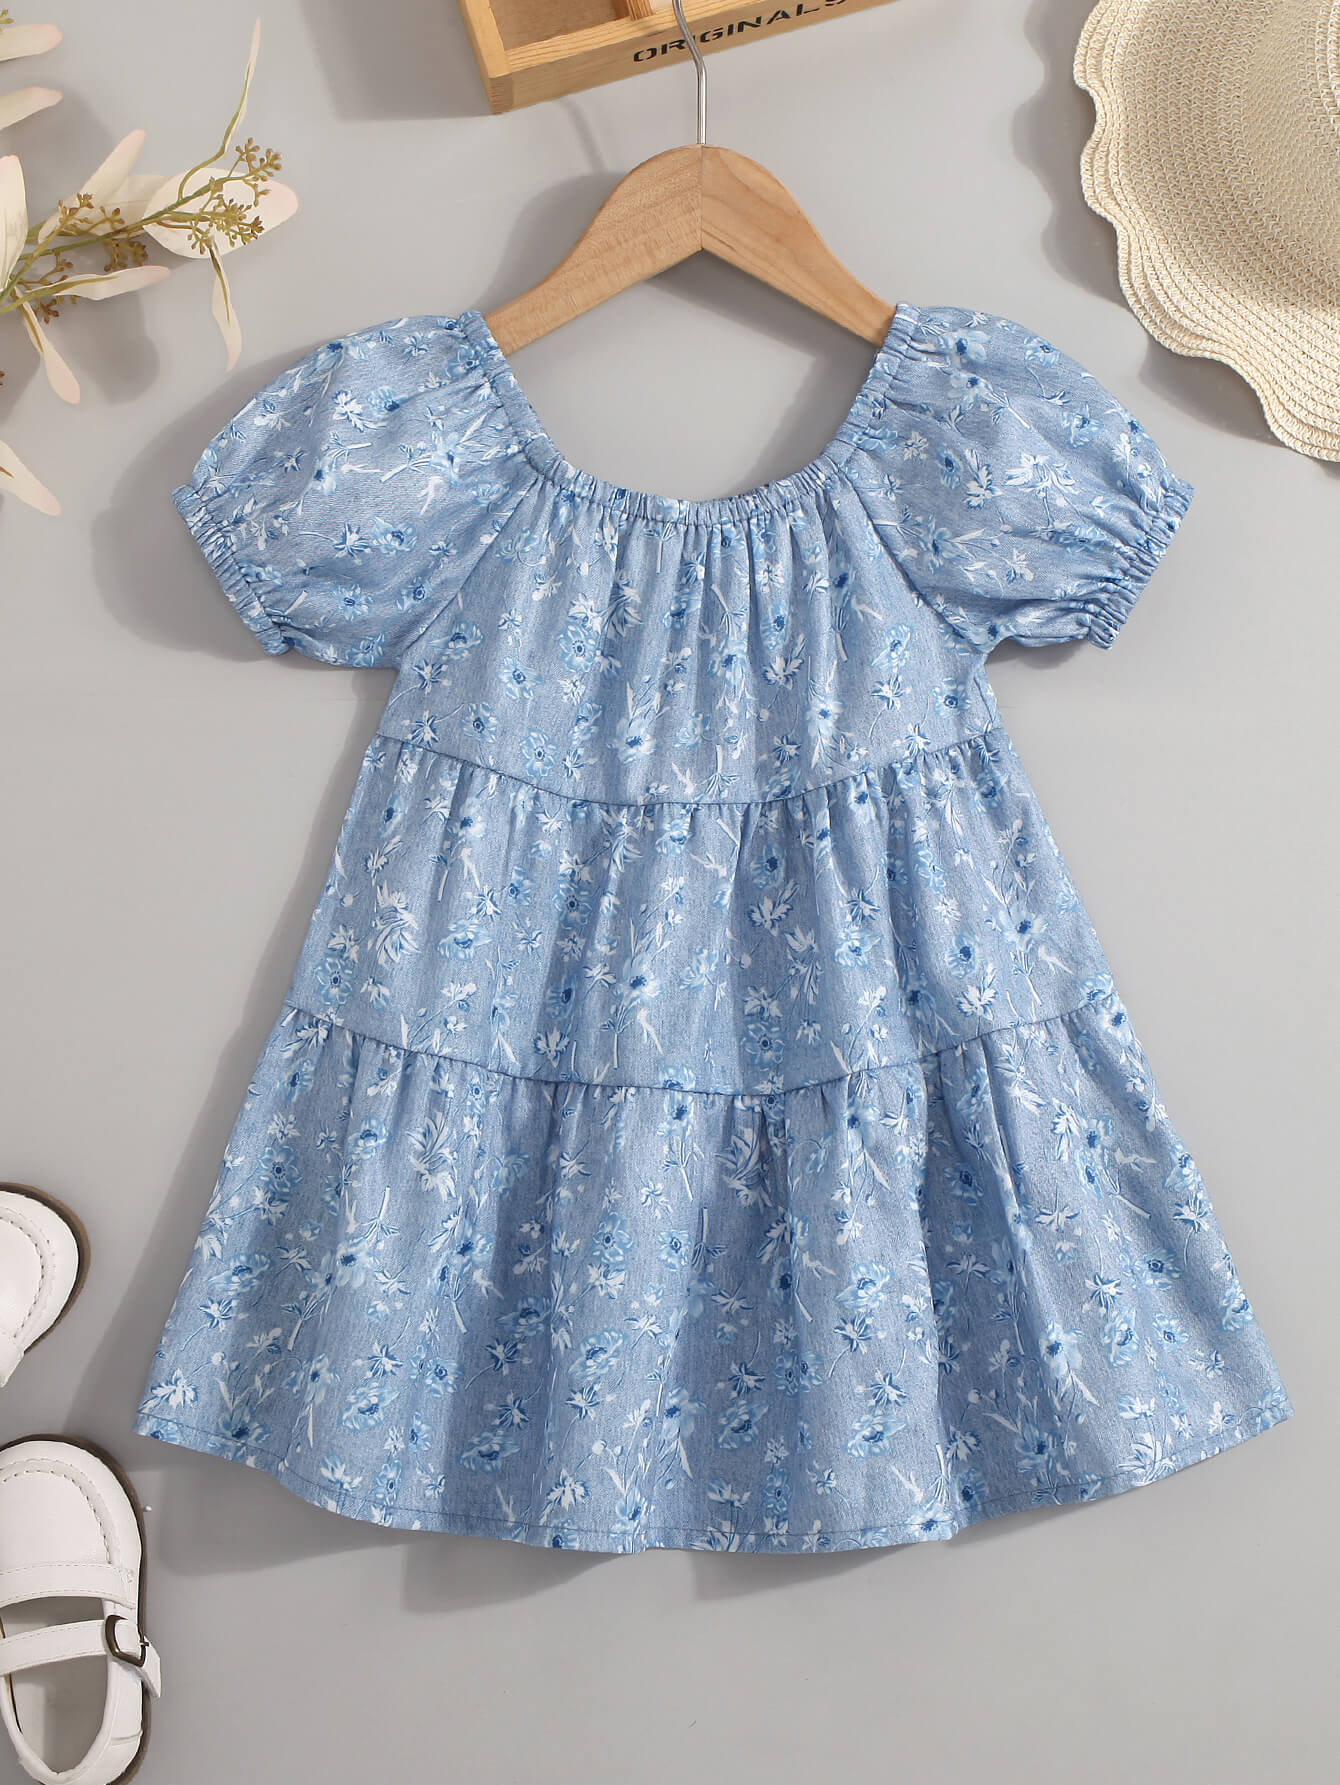 Girls Ditsy Floral Tiered Dress 1y-6y - Fashion Girl Online Store